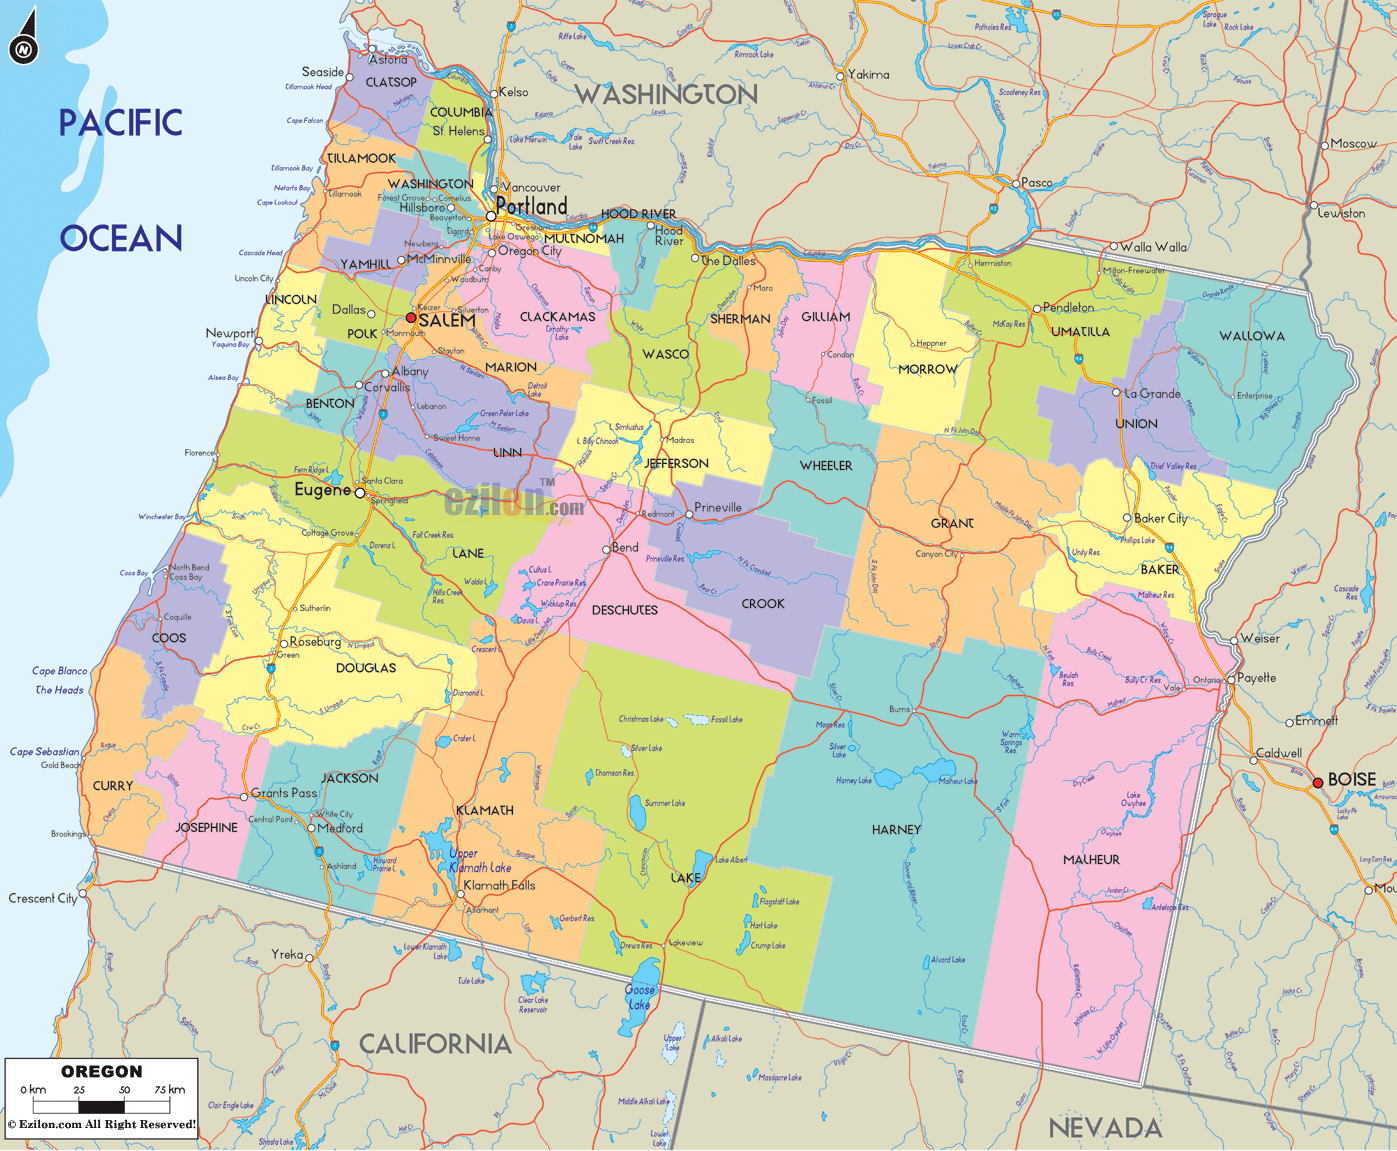 State Of Oregon County Records Guide Oregon Maps